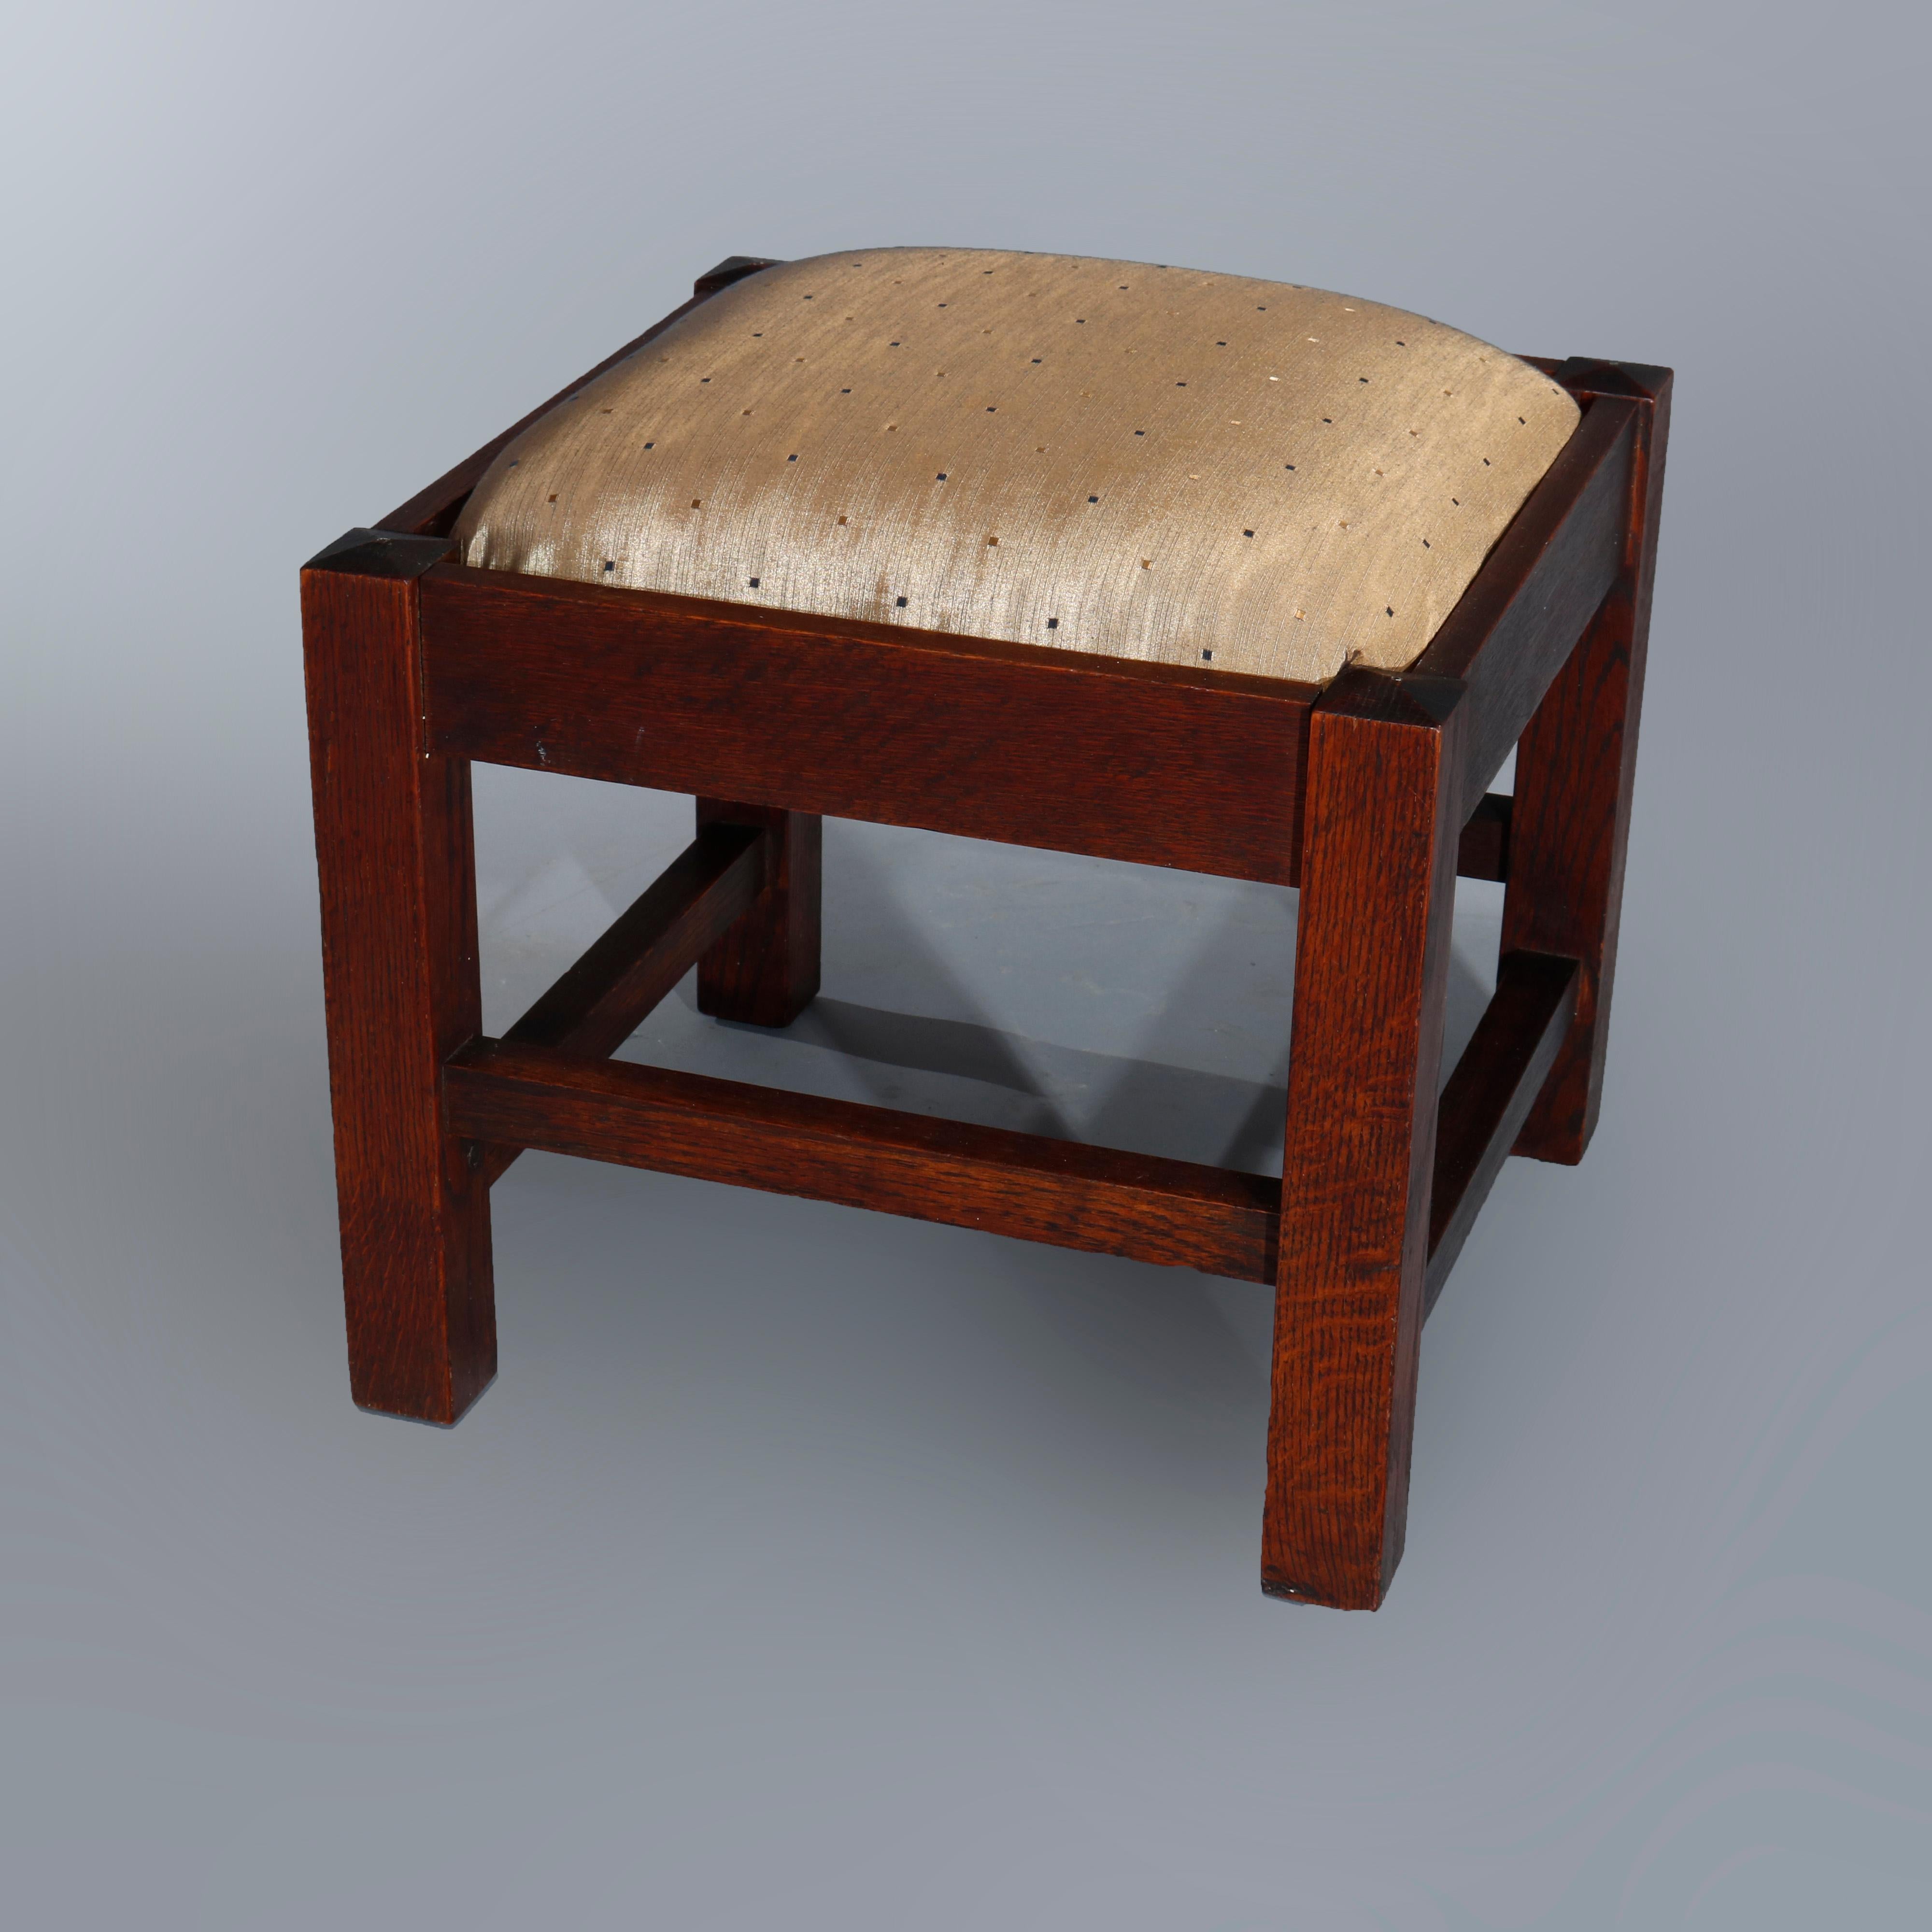 An antique and large Arts & Crafts Mission ottoman in the manner of Stickley Bros. offers upholstered seat within oak frame having square and straight legs, circa 1910.

Measures: 20